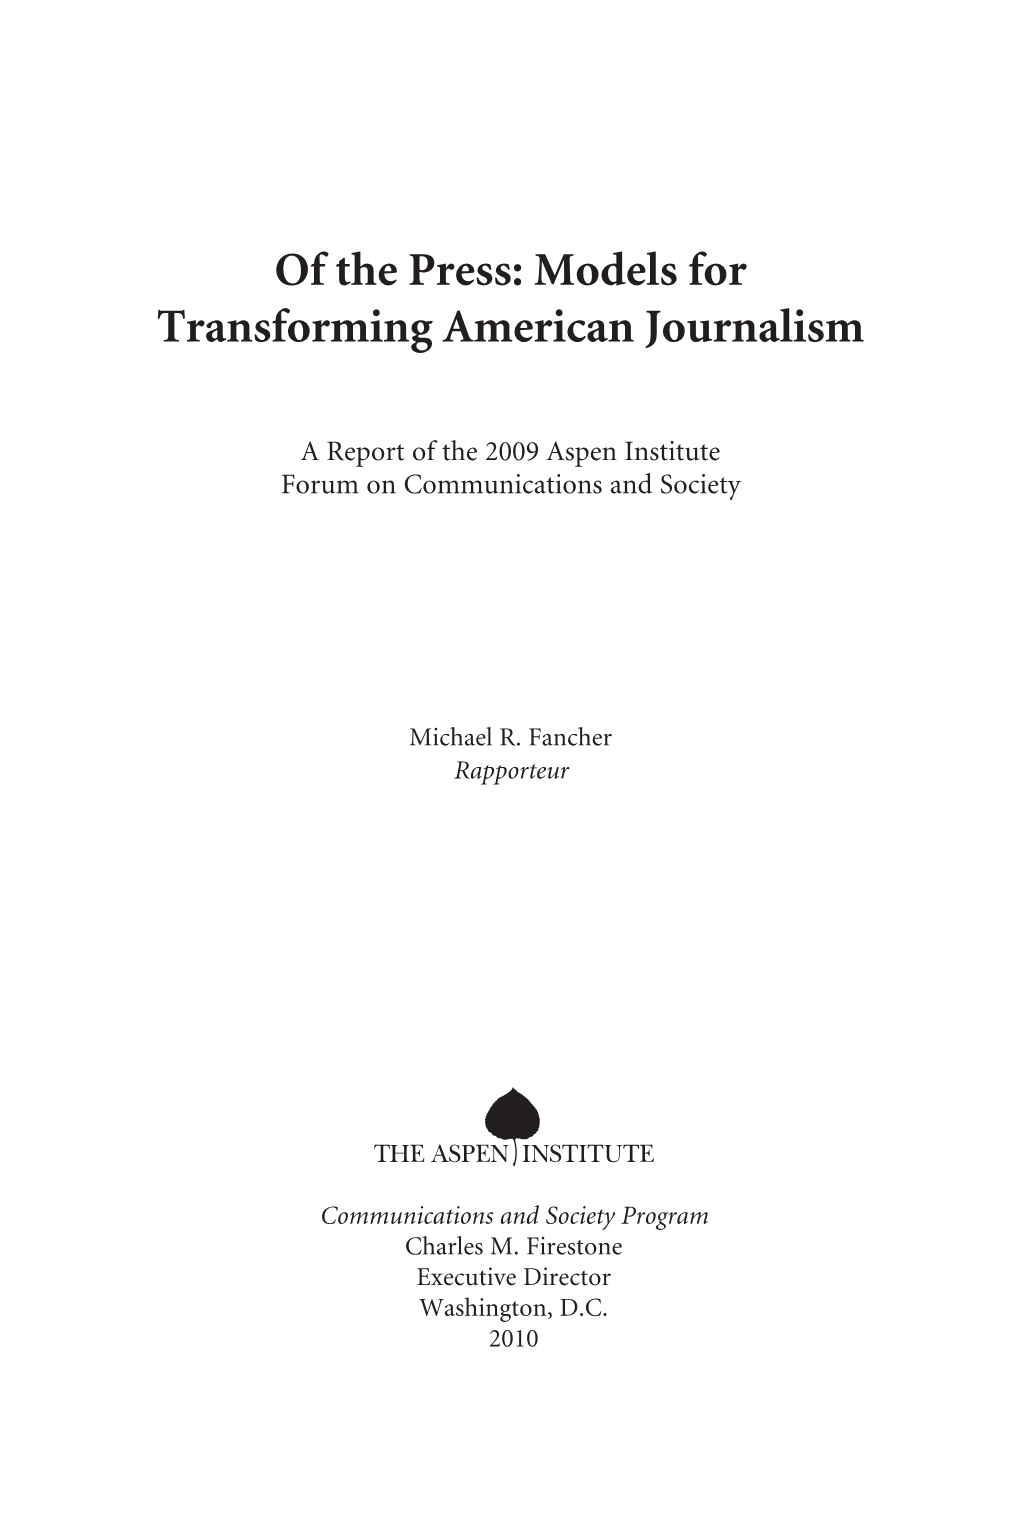 Of the Press: Models for Transforming American Journalism